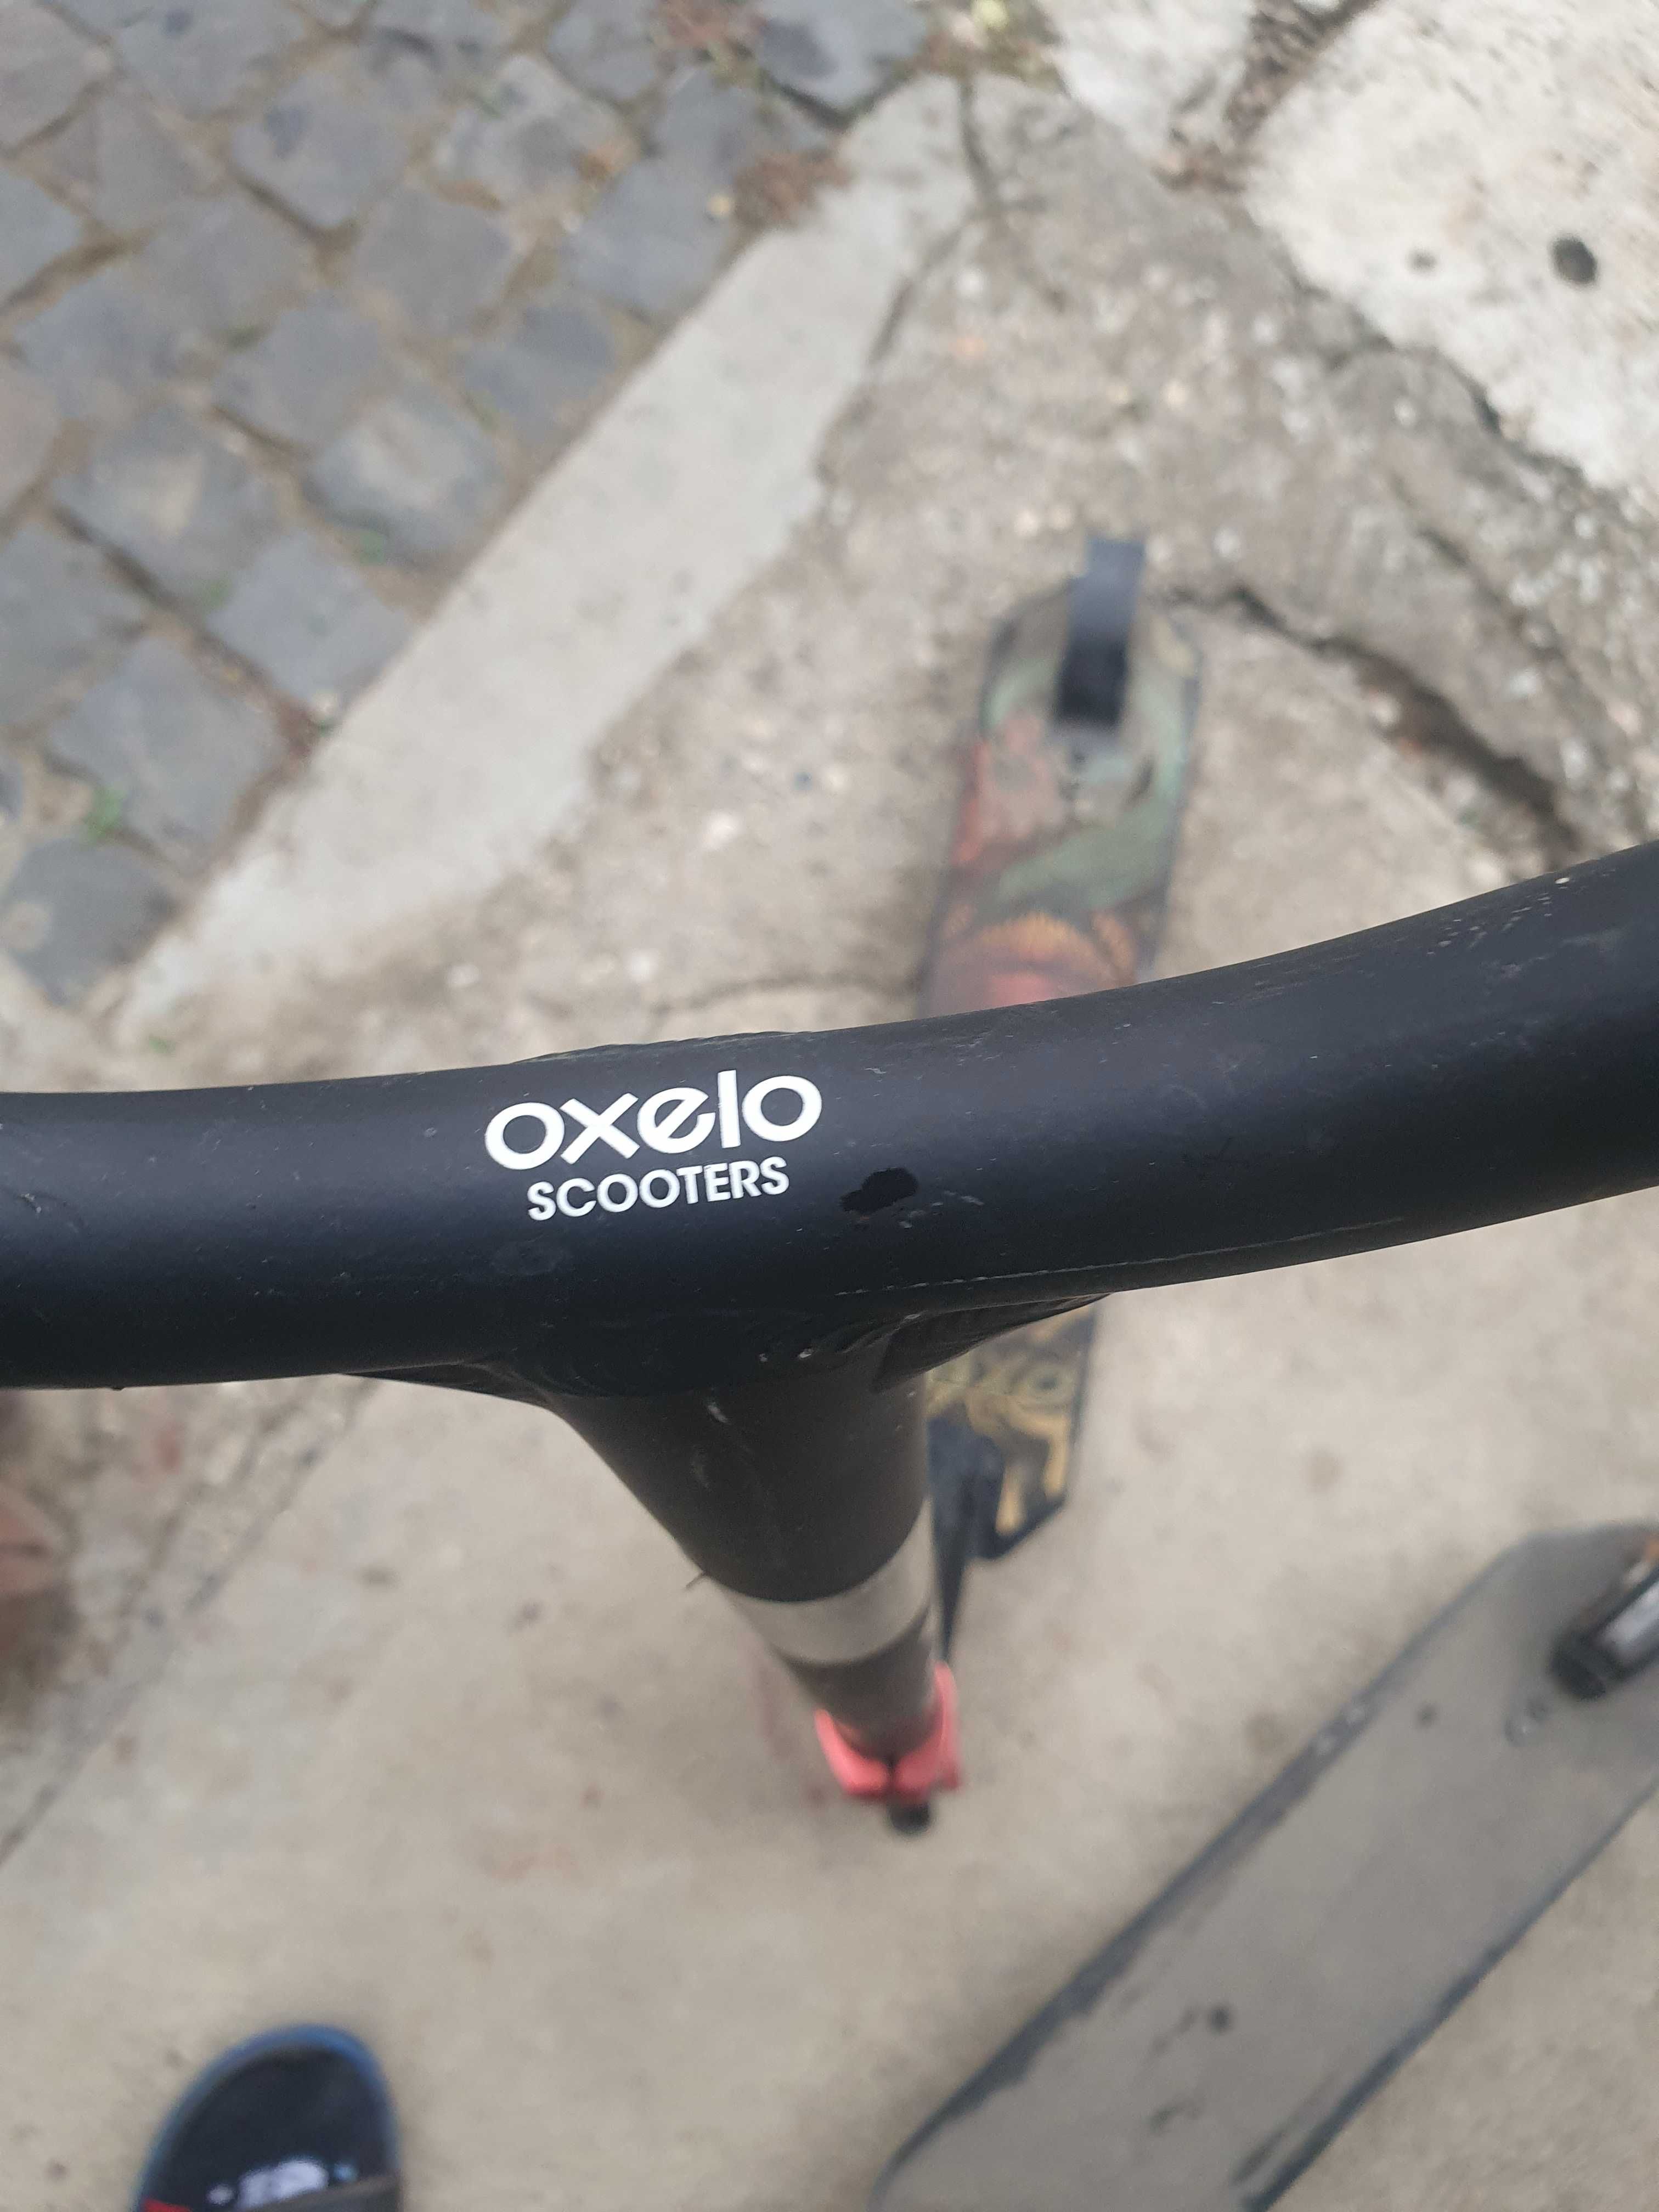 Trotinete Oxelo Scooters